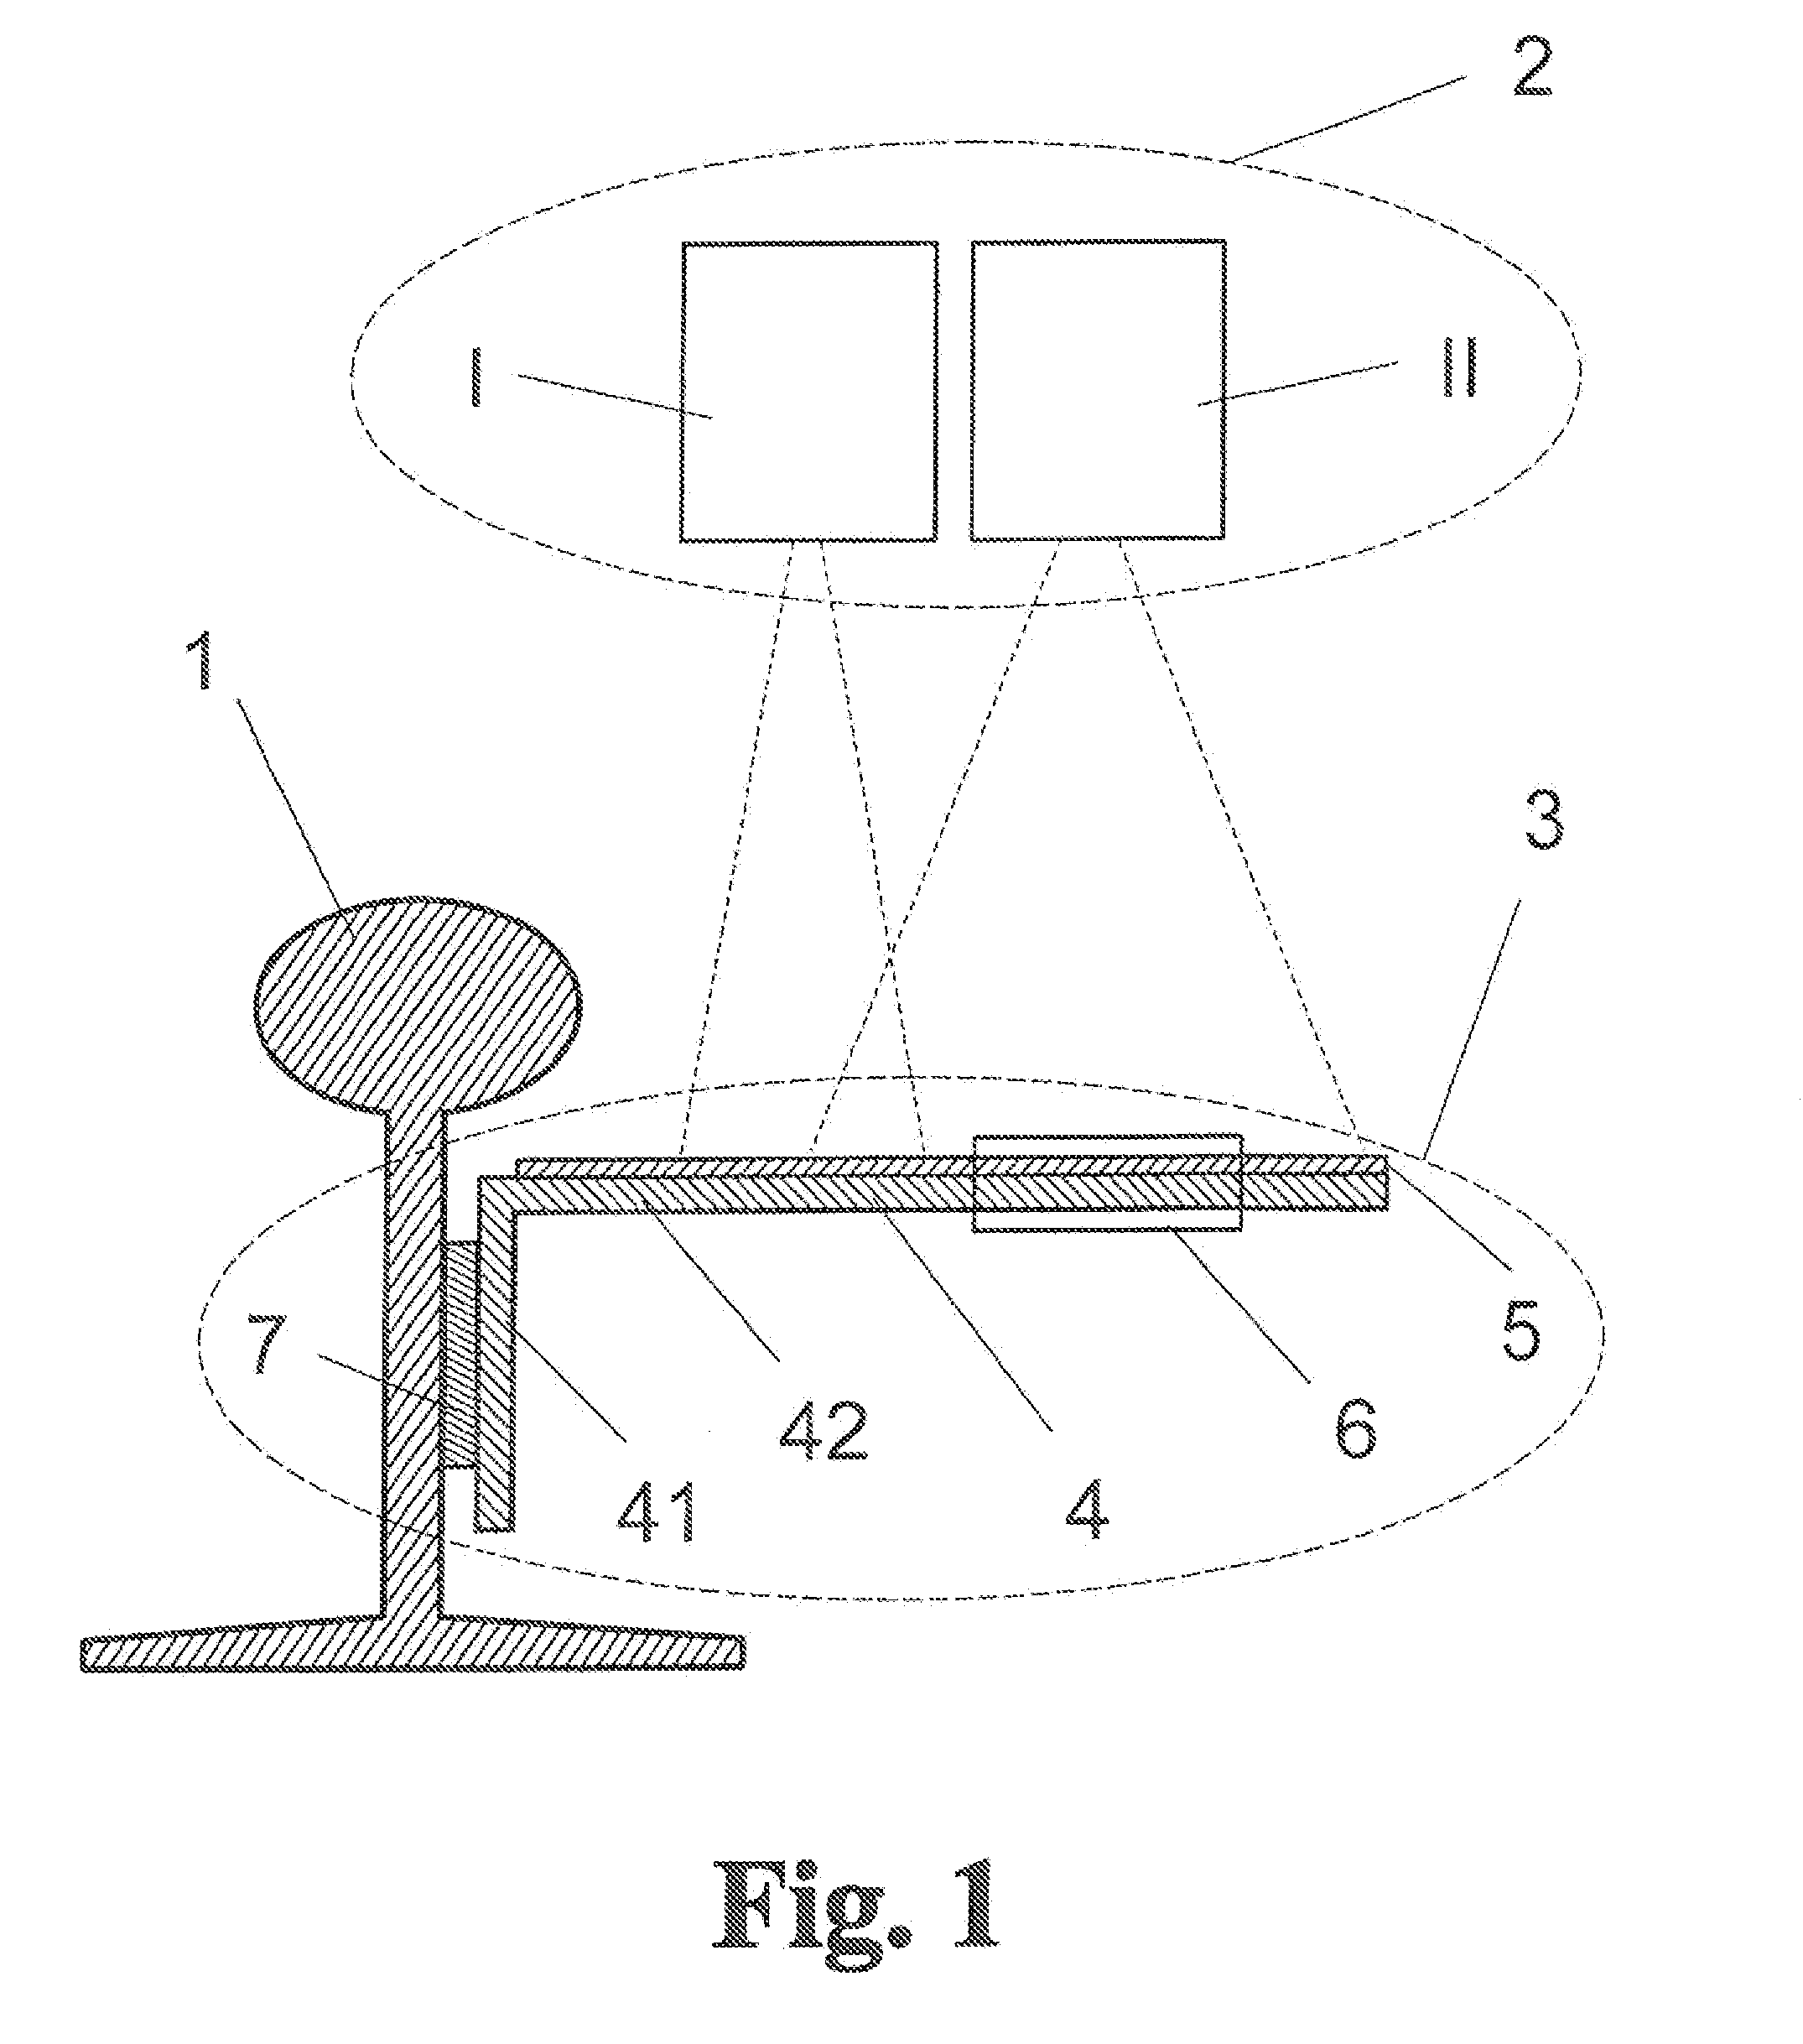 Arrangement for measuring sections of track for the purpose of maintaining railroad tracks